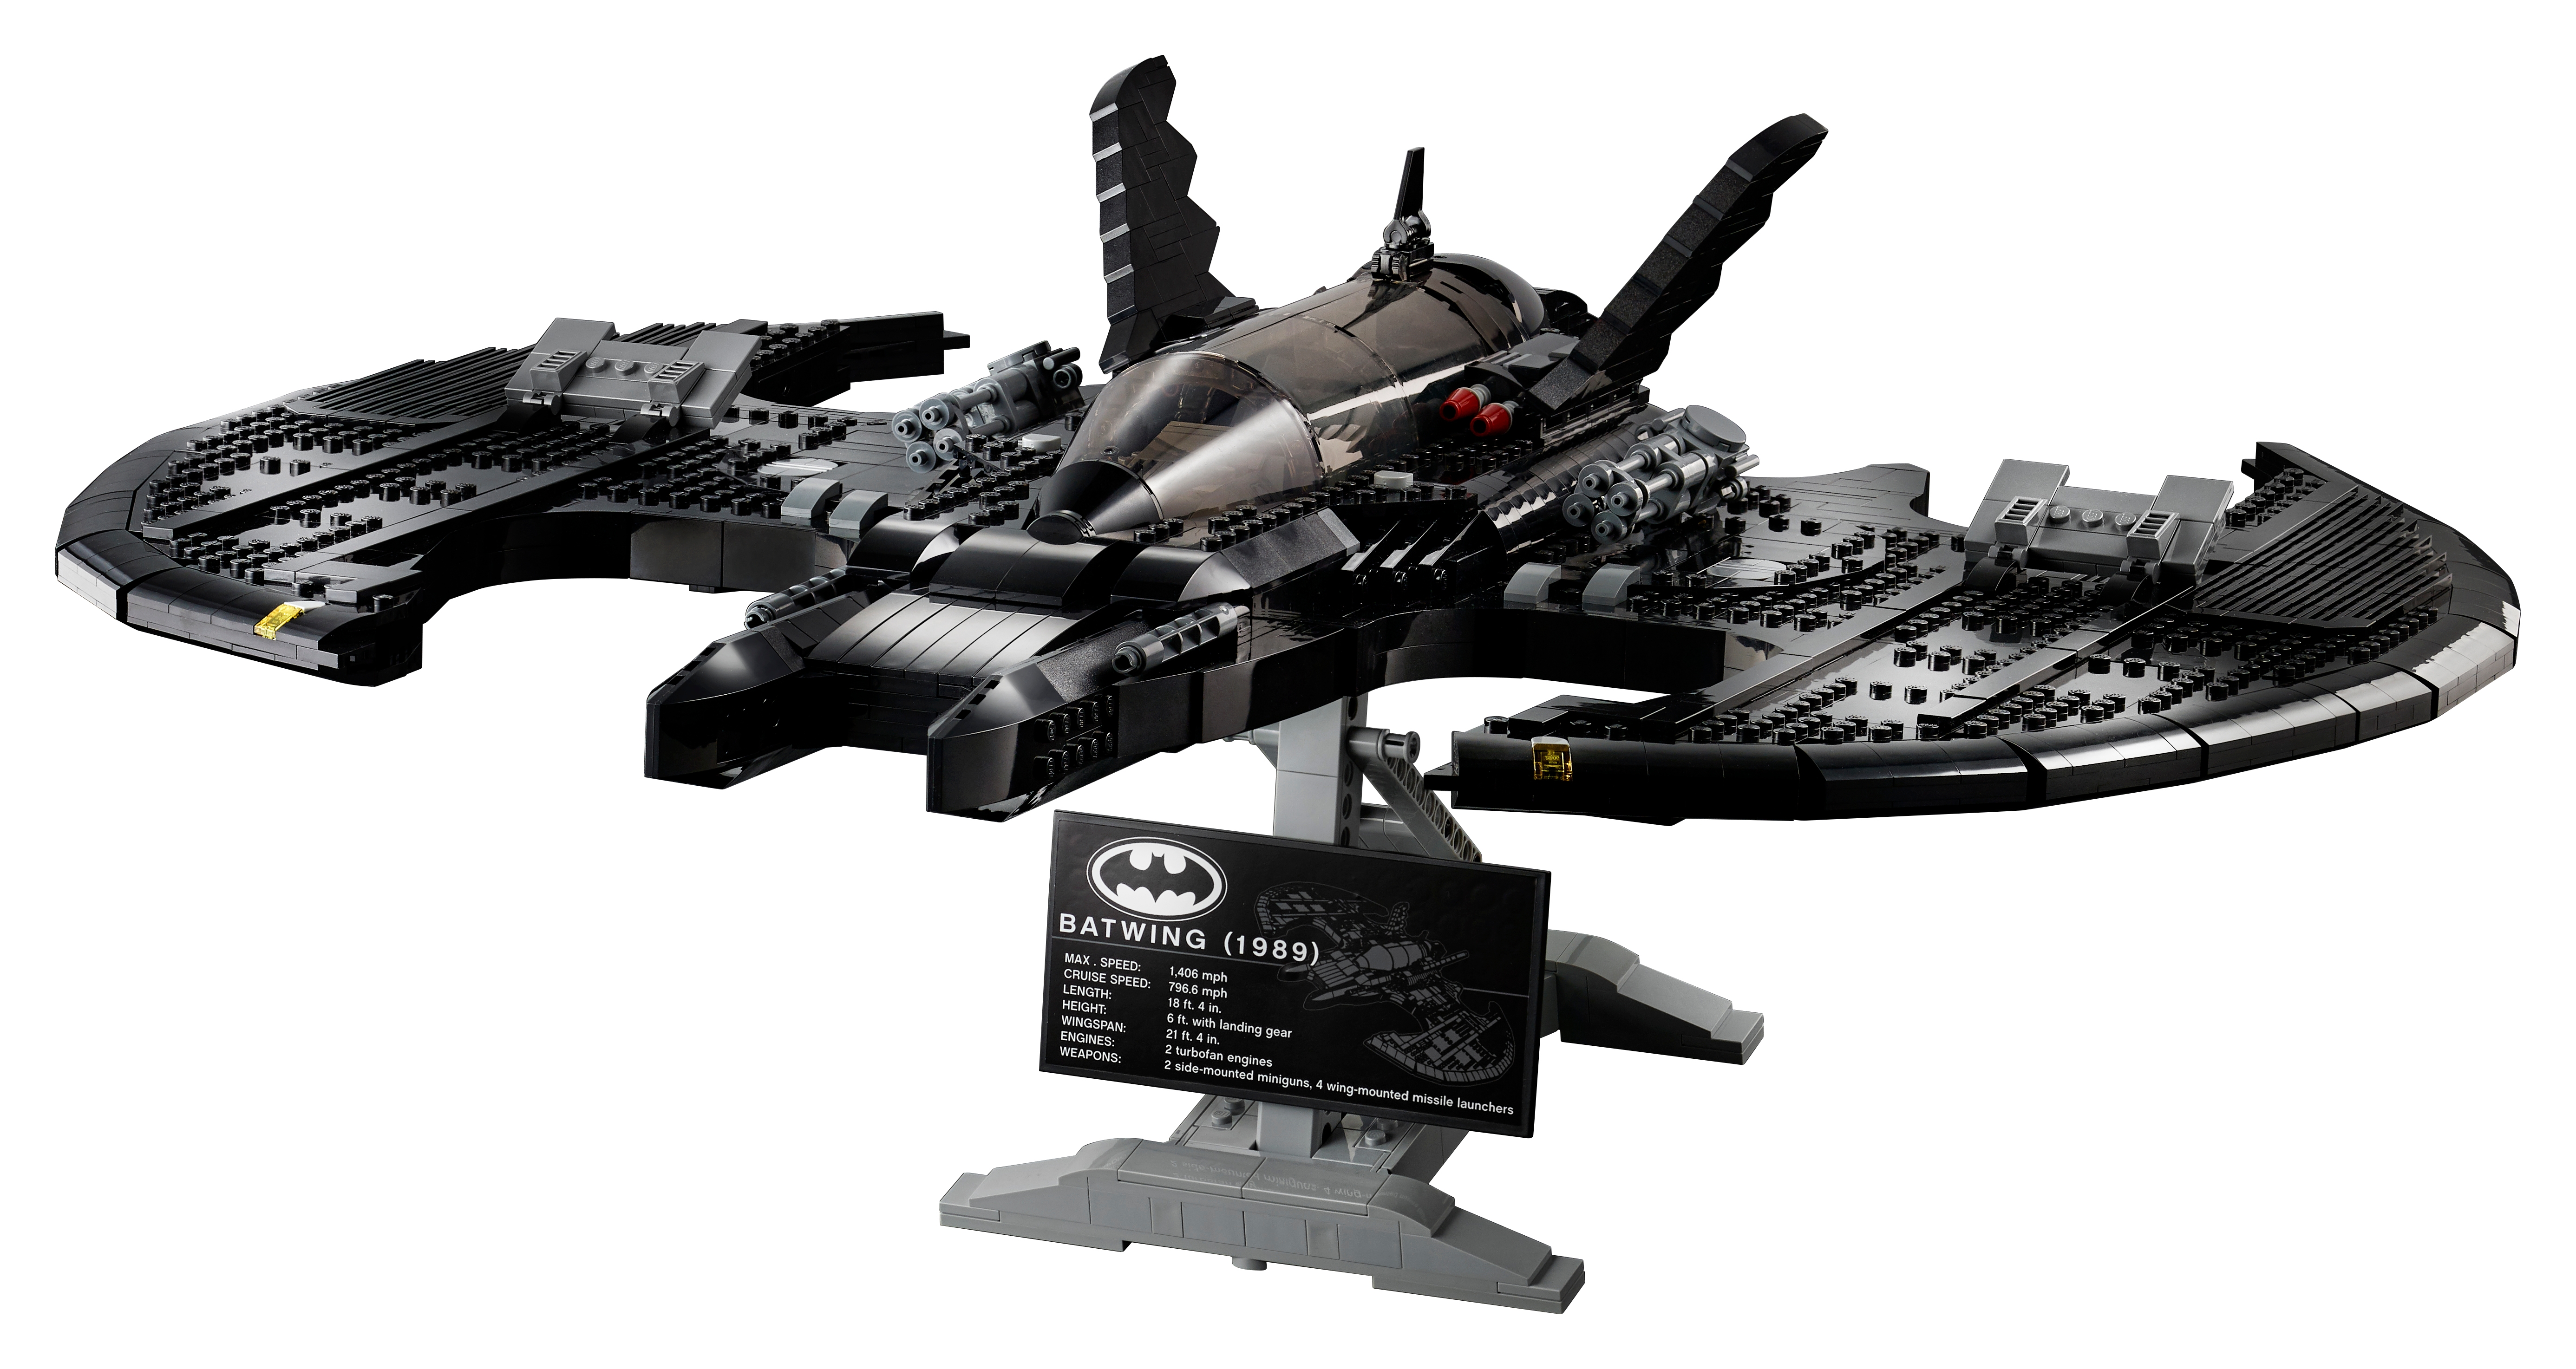 LEGO DC Batman 1989 Batwing 76161 Displayable Model with a Buildable  Vehicle and Collectible Figures: Batman, The Joker – Mime Version and  Lawrence